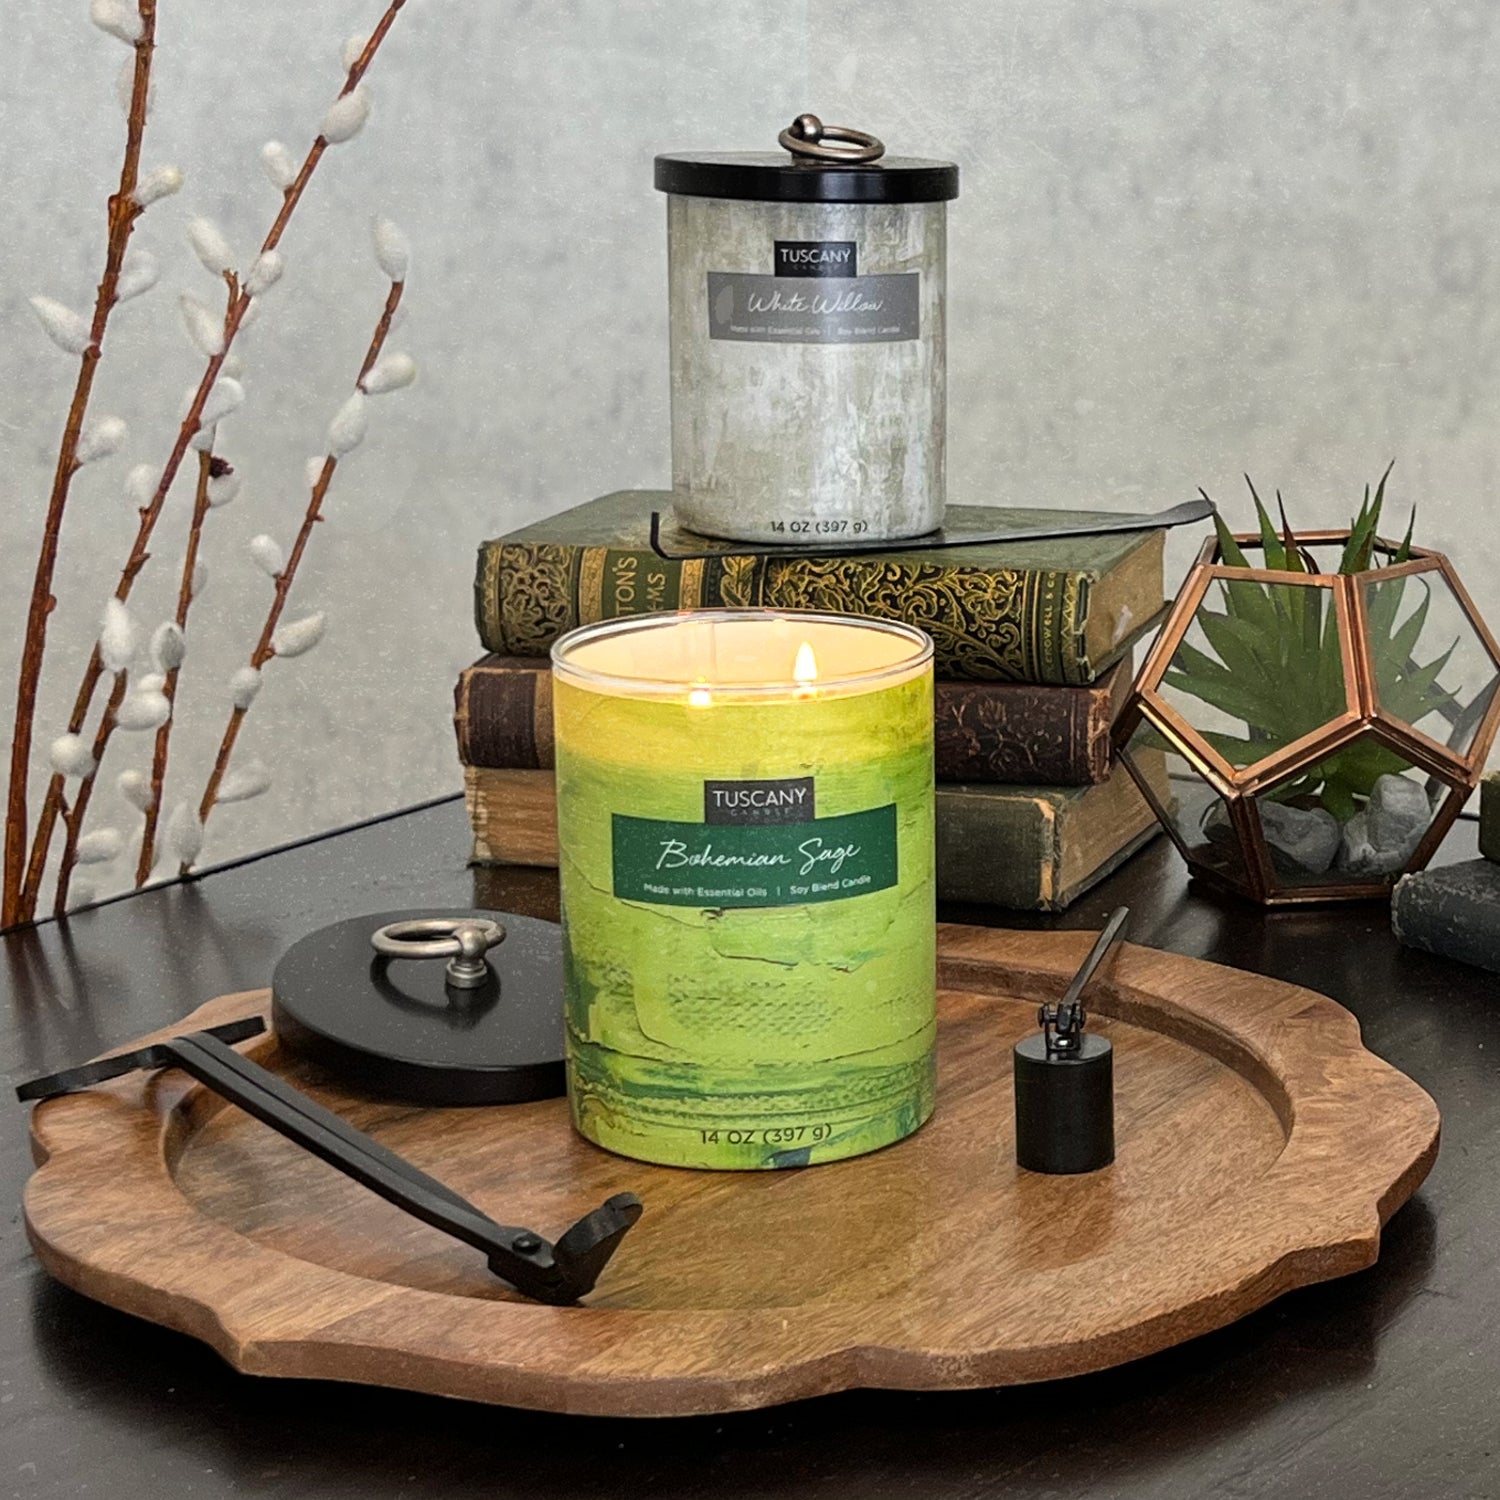 A White Willow Scented Jar Candle (14 oz) from Tuscany Candle sits on a wooden tray next to books, enhancing home décor.